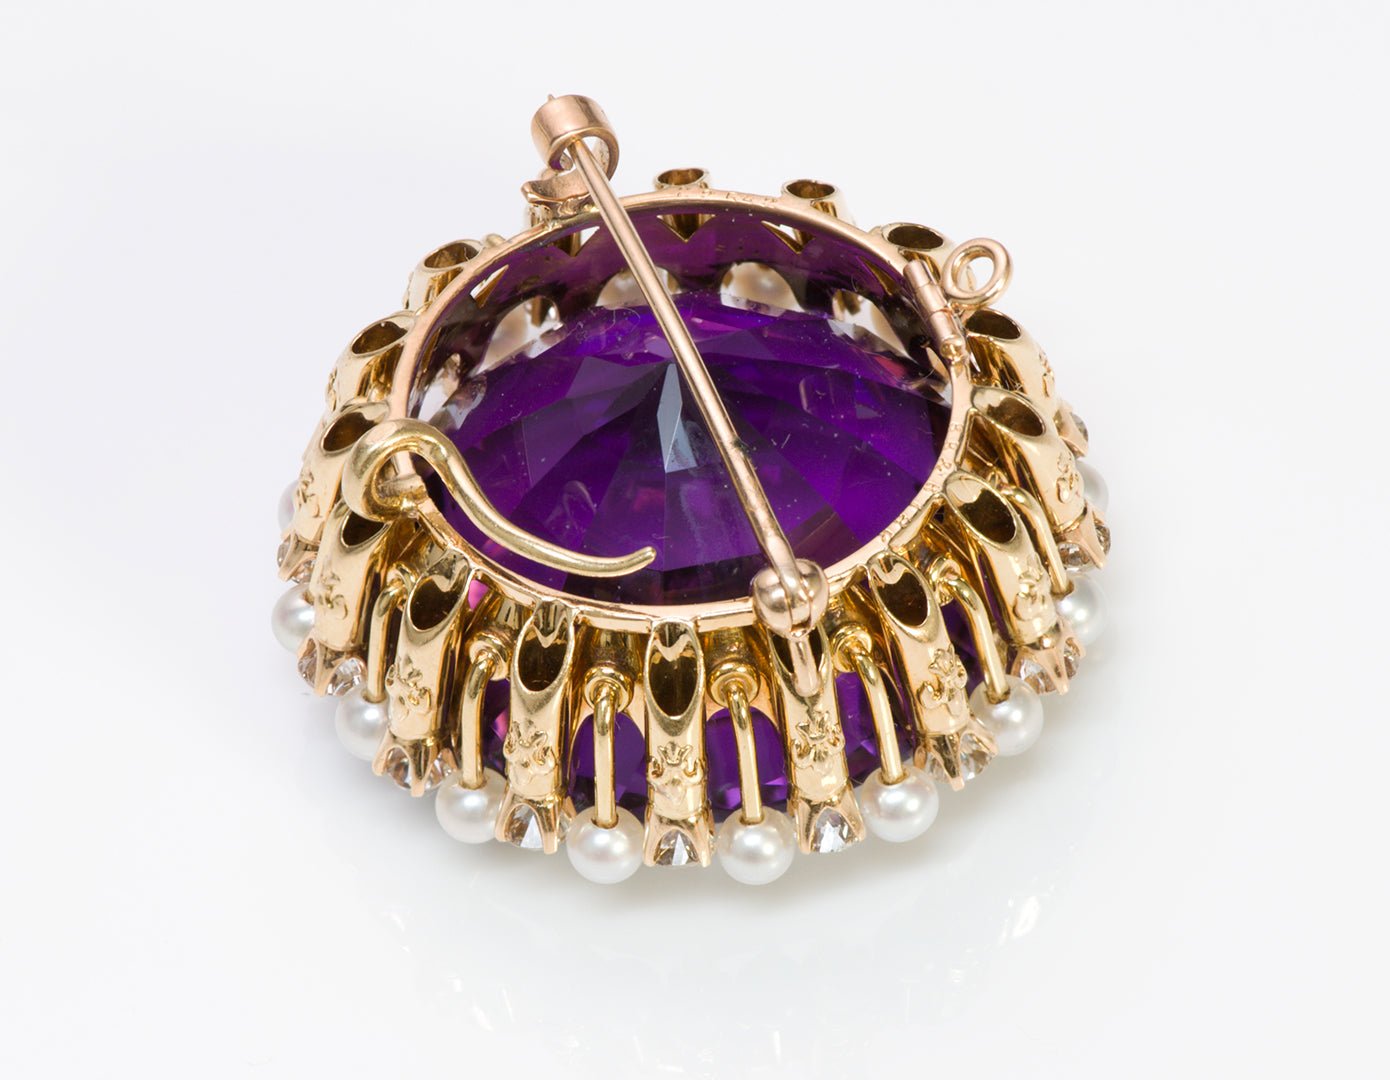 Bailey Banks & Biddle Antique Gold Amethyst Diamond Pearl Pendant Brooch - DSF Antique Jewelry